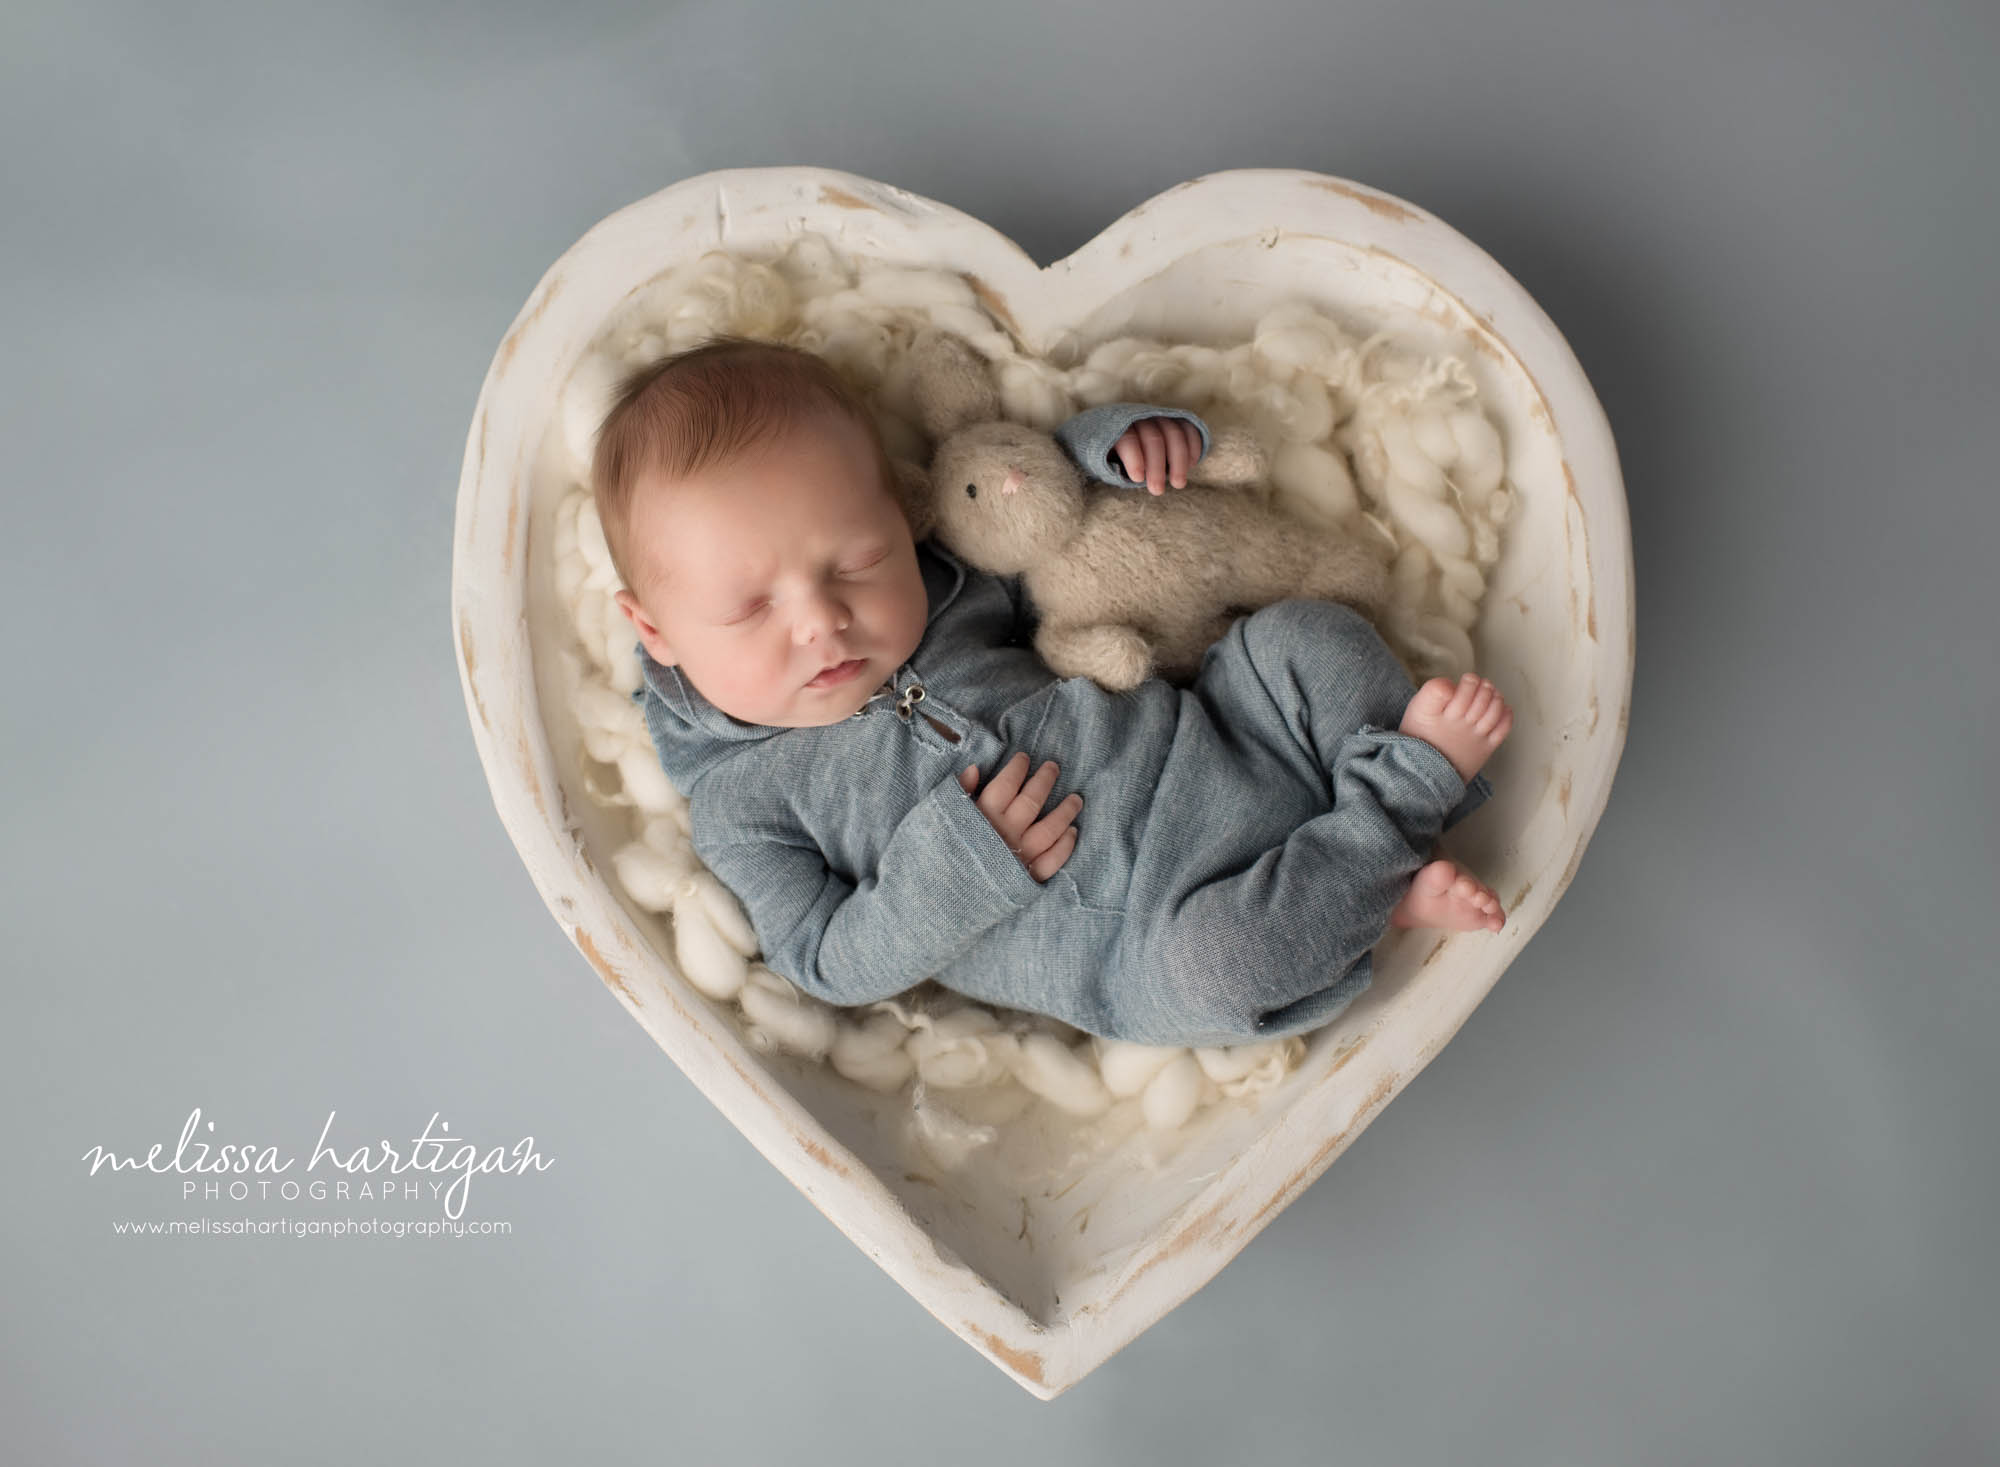 newborn baby boy posed in cream wooden heart bowl prop wearing blue outfit holding teddy